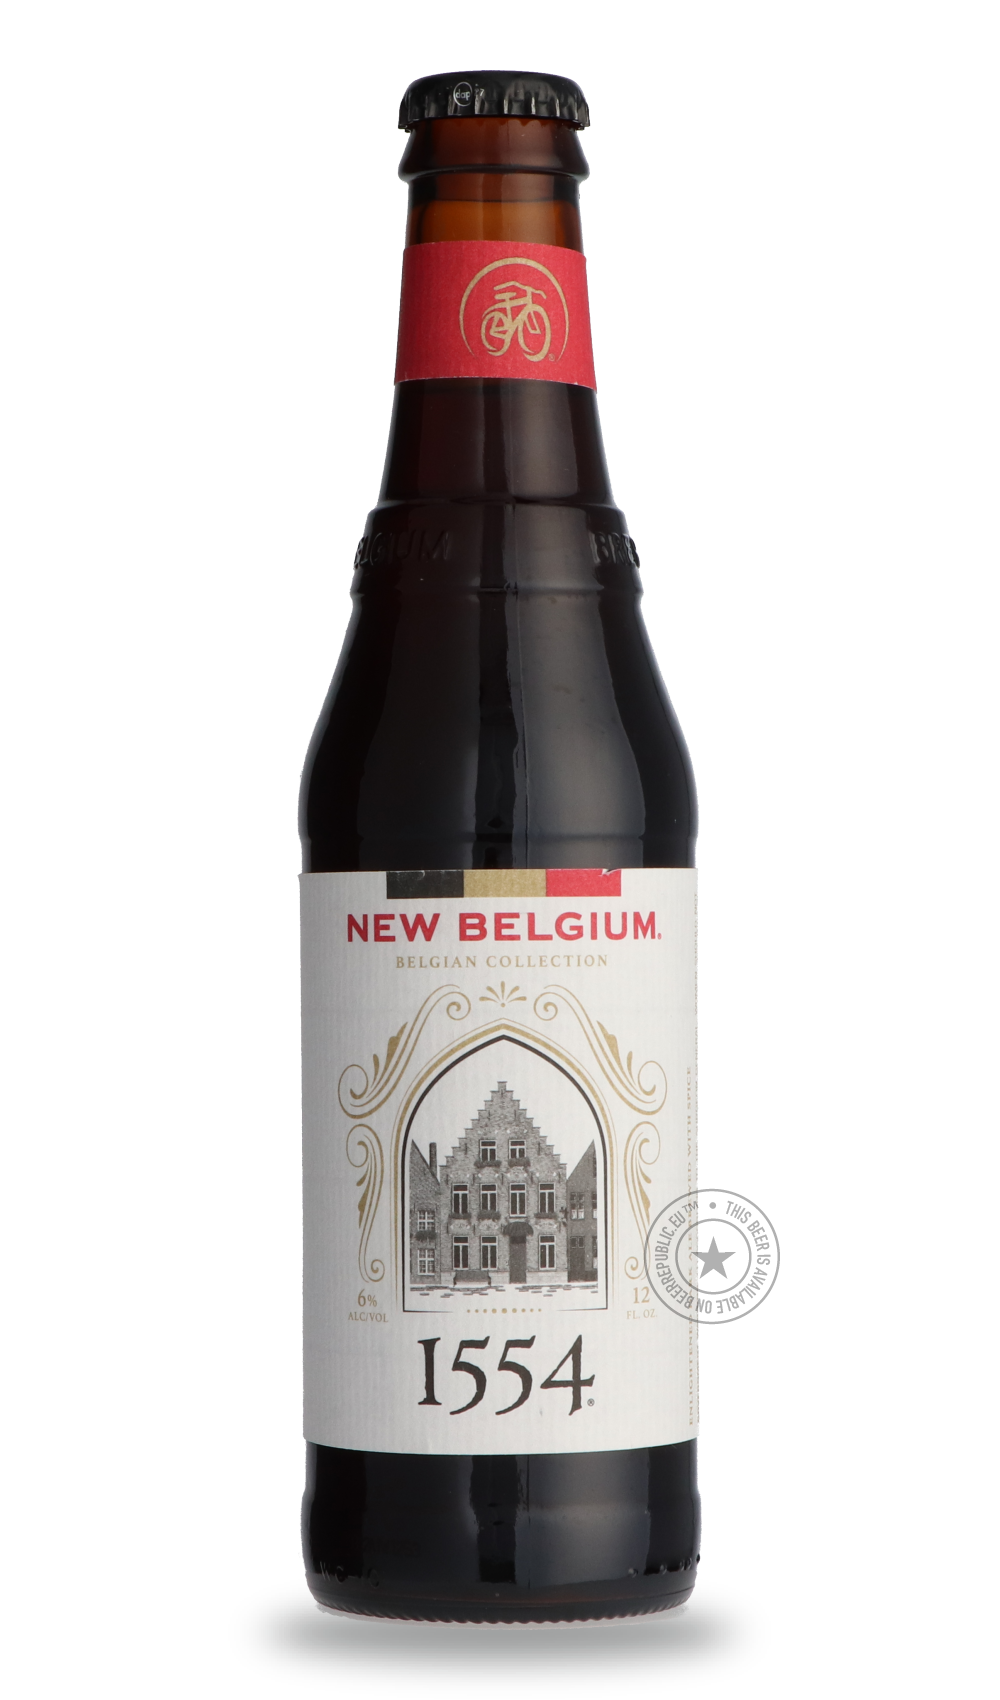 -New Belgium- 1554-Brown & Dark- Only @ Beer Republic - The best online beer store for American & Canadian craft beer - Buy beer online from the USA and Canada - Bier online kopen - Amerikaans bier kopen - Craft beer store - Craft beer kopen - Amerikanisch bier kaufen - Bier online kaufen - Acheter biere online - IPA - Stout - Porter - New England IPA - Hazy IPA - Imperial Stout - Barrel Aged - Barrel Aged Imperial Stout - Brown - Dark beer - Blond - Blonde - Pilsner - Lager - Wheat - Weizen - Amber - Barle